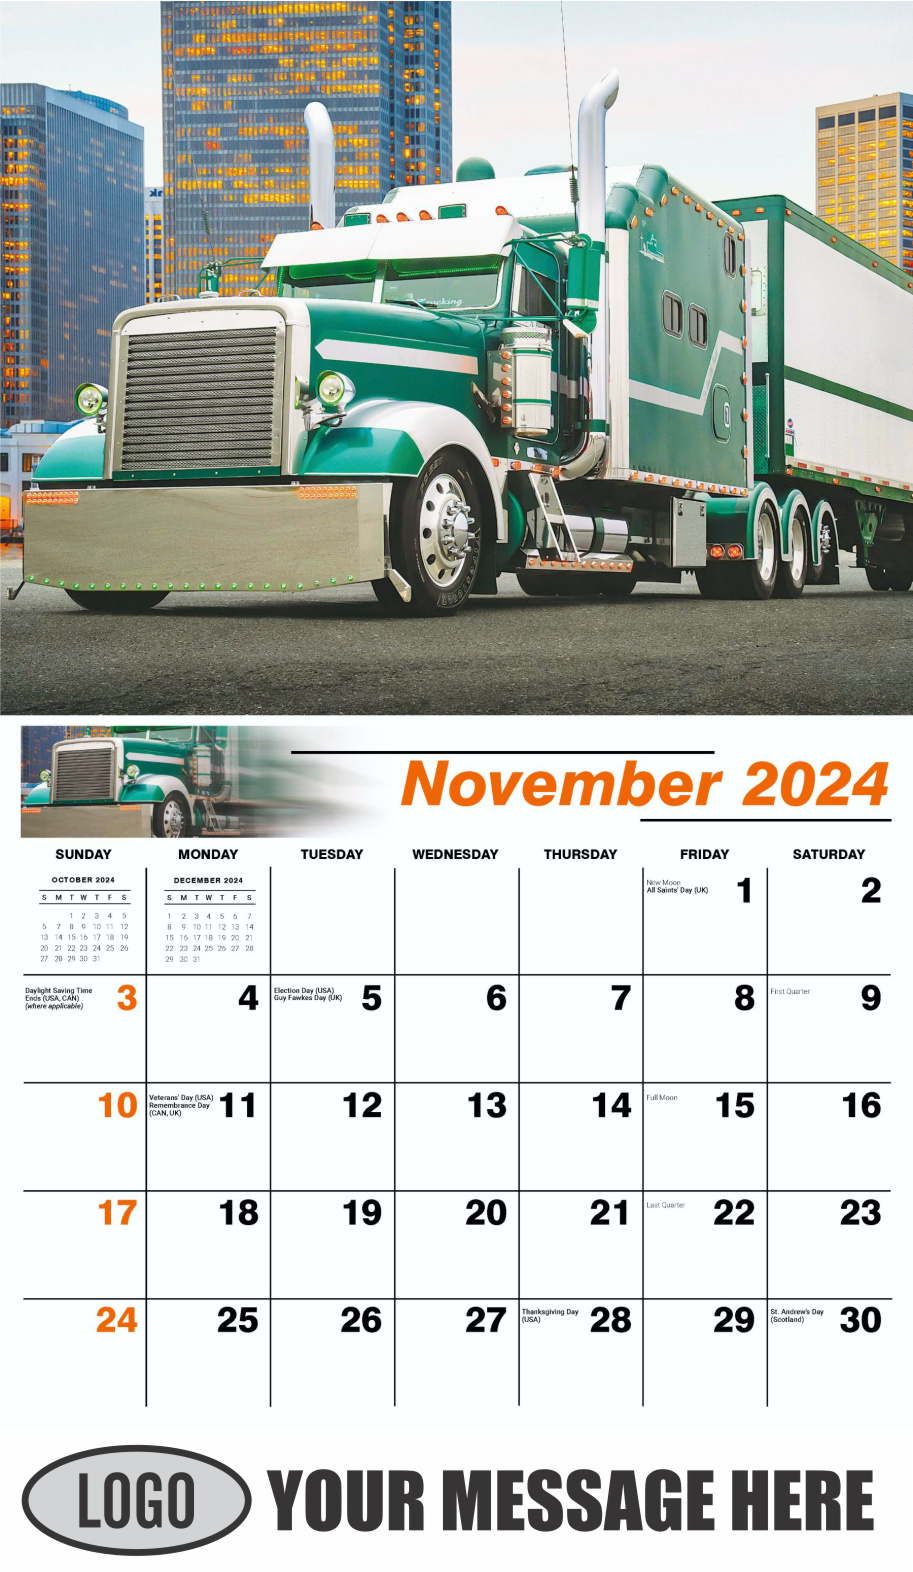 Kings of the Road 2024 Automotive Business Promotional Calendar - November